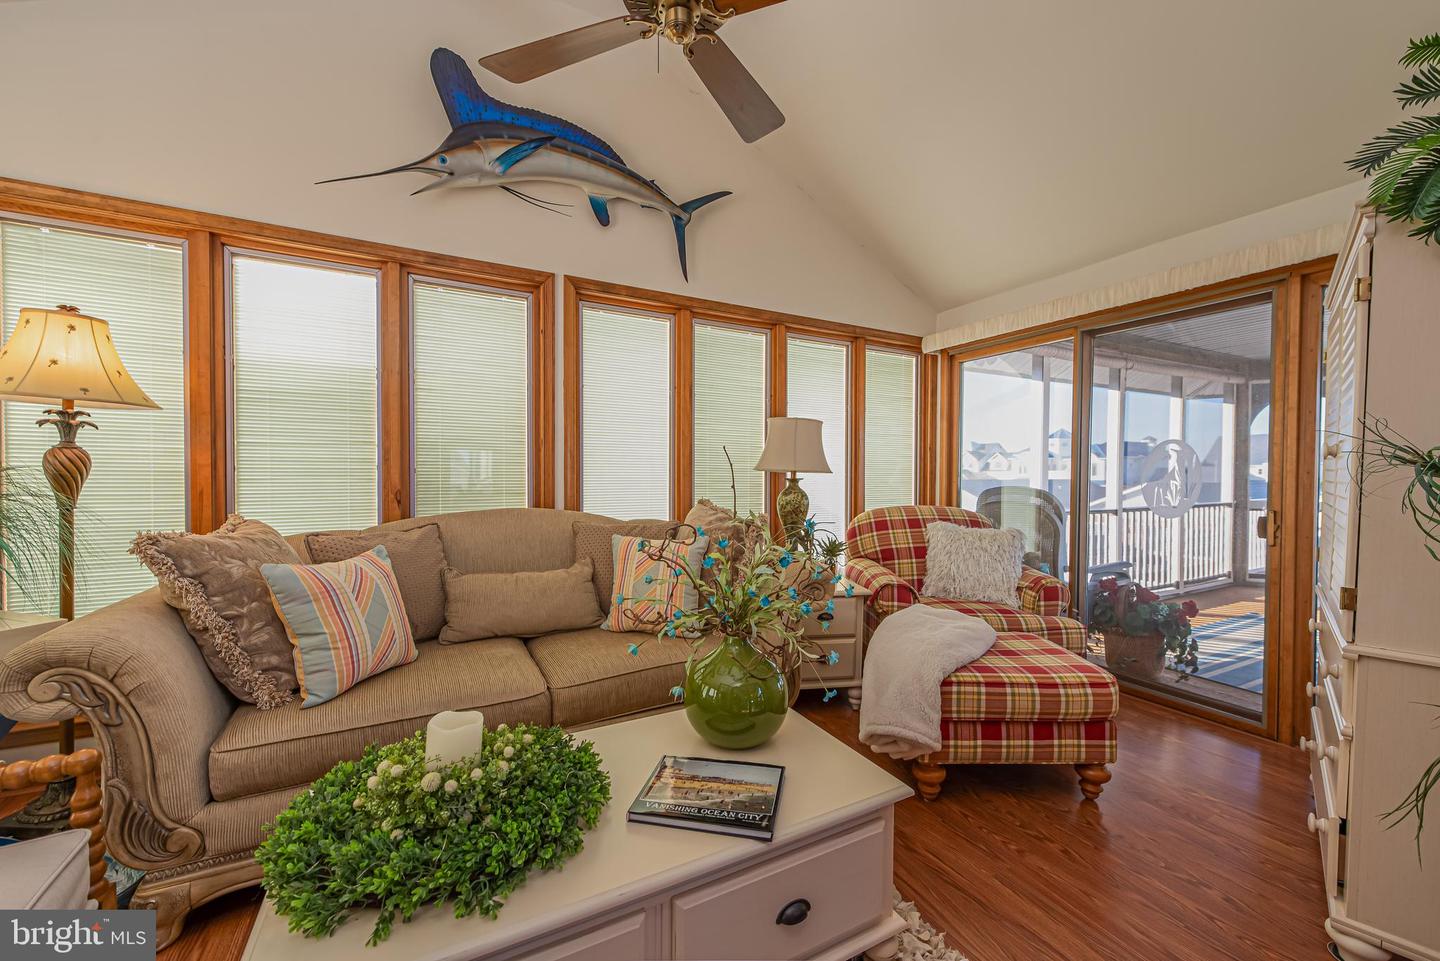 MDWO2019074-802877627880-2024-02-25-13-51-31 154 Old Wharf Rd | Ocean City, MD Real Estate For Sale | MLS# Mdwo2019074  - 1st Choice Properties